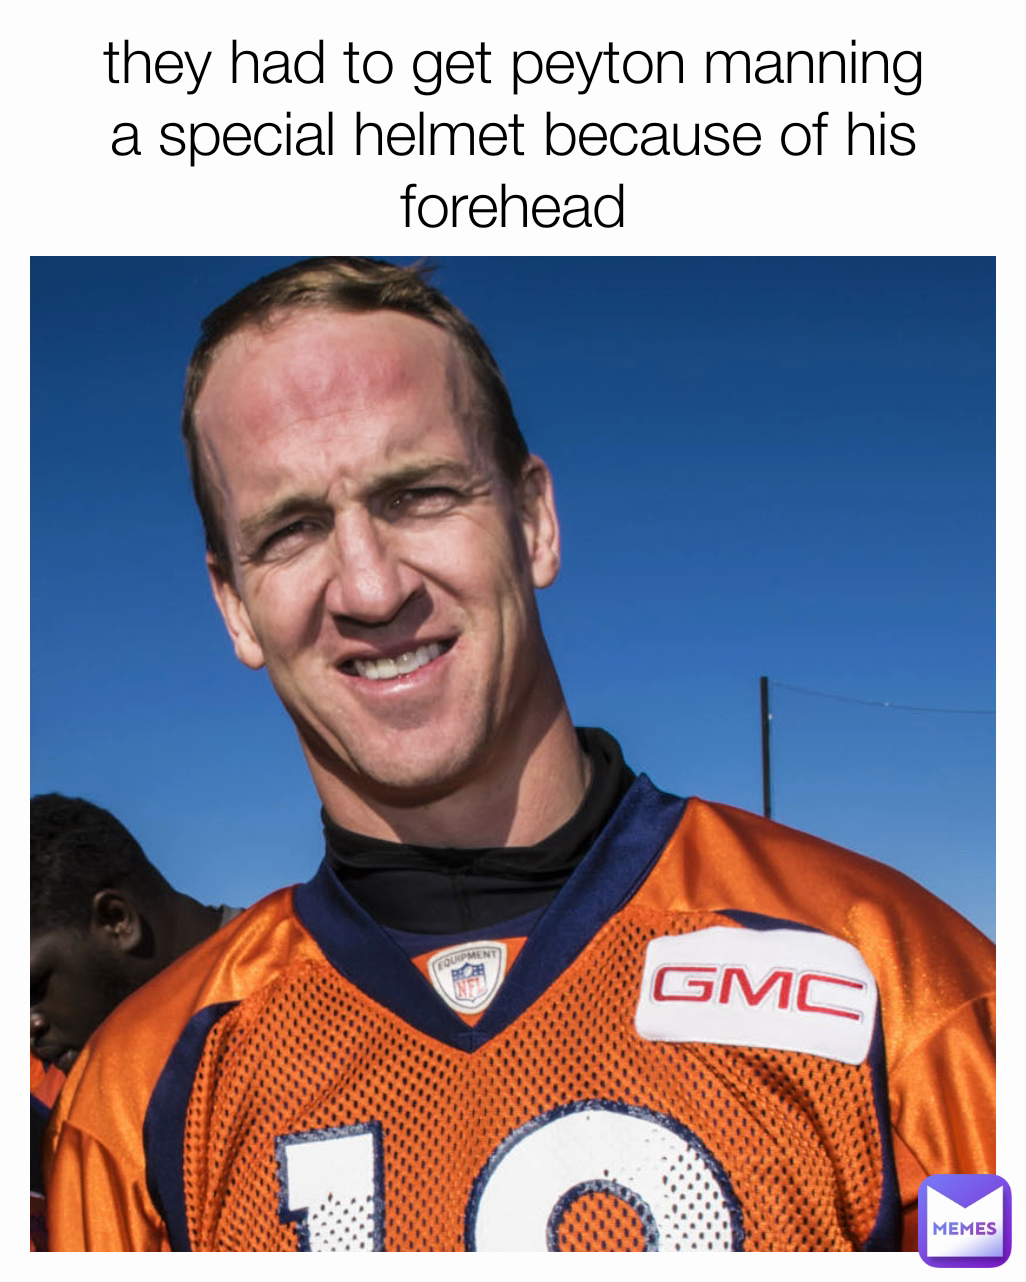 they had to get peyton manning a special helmet because of his forehead